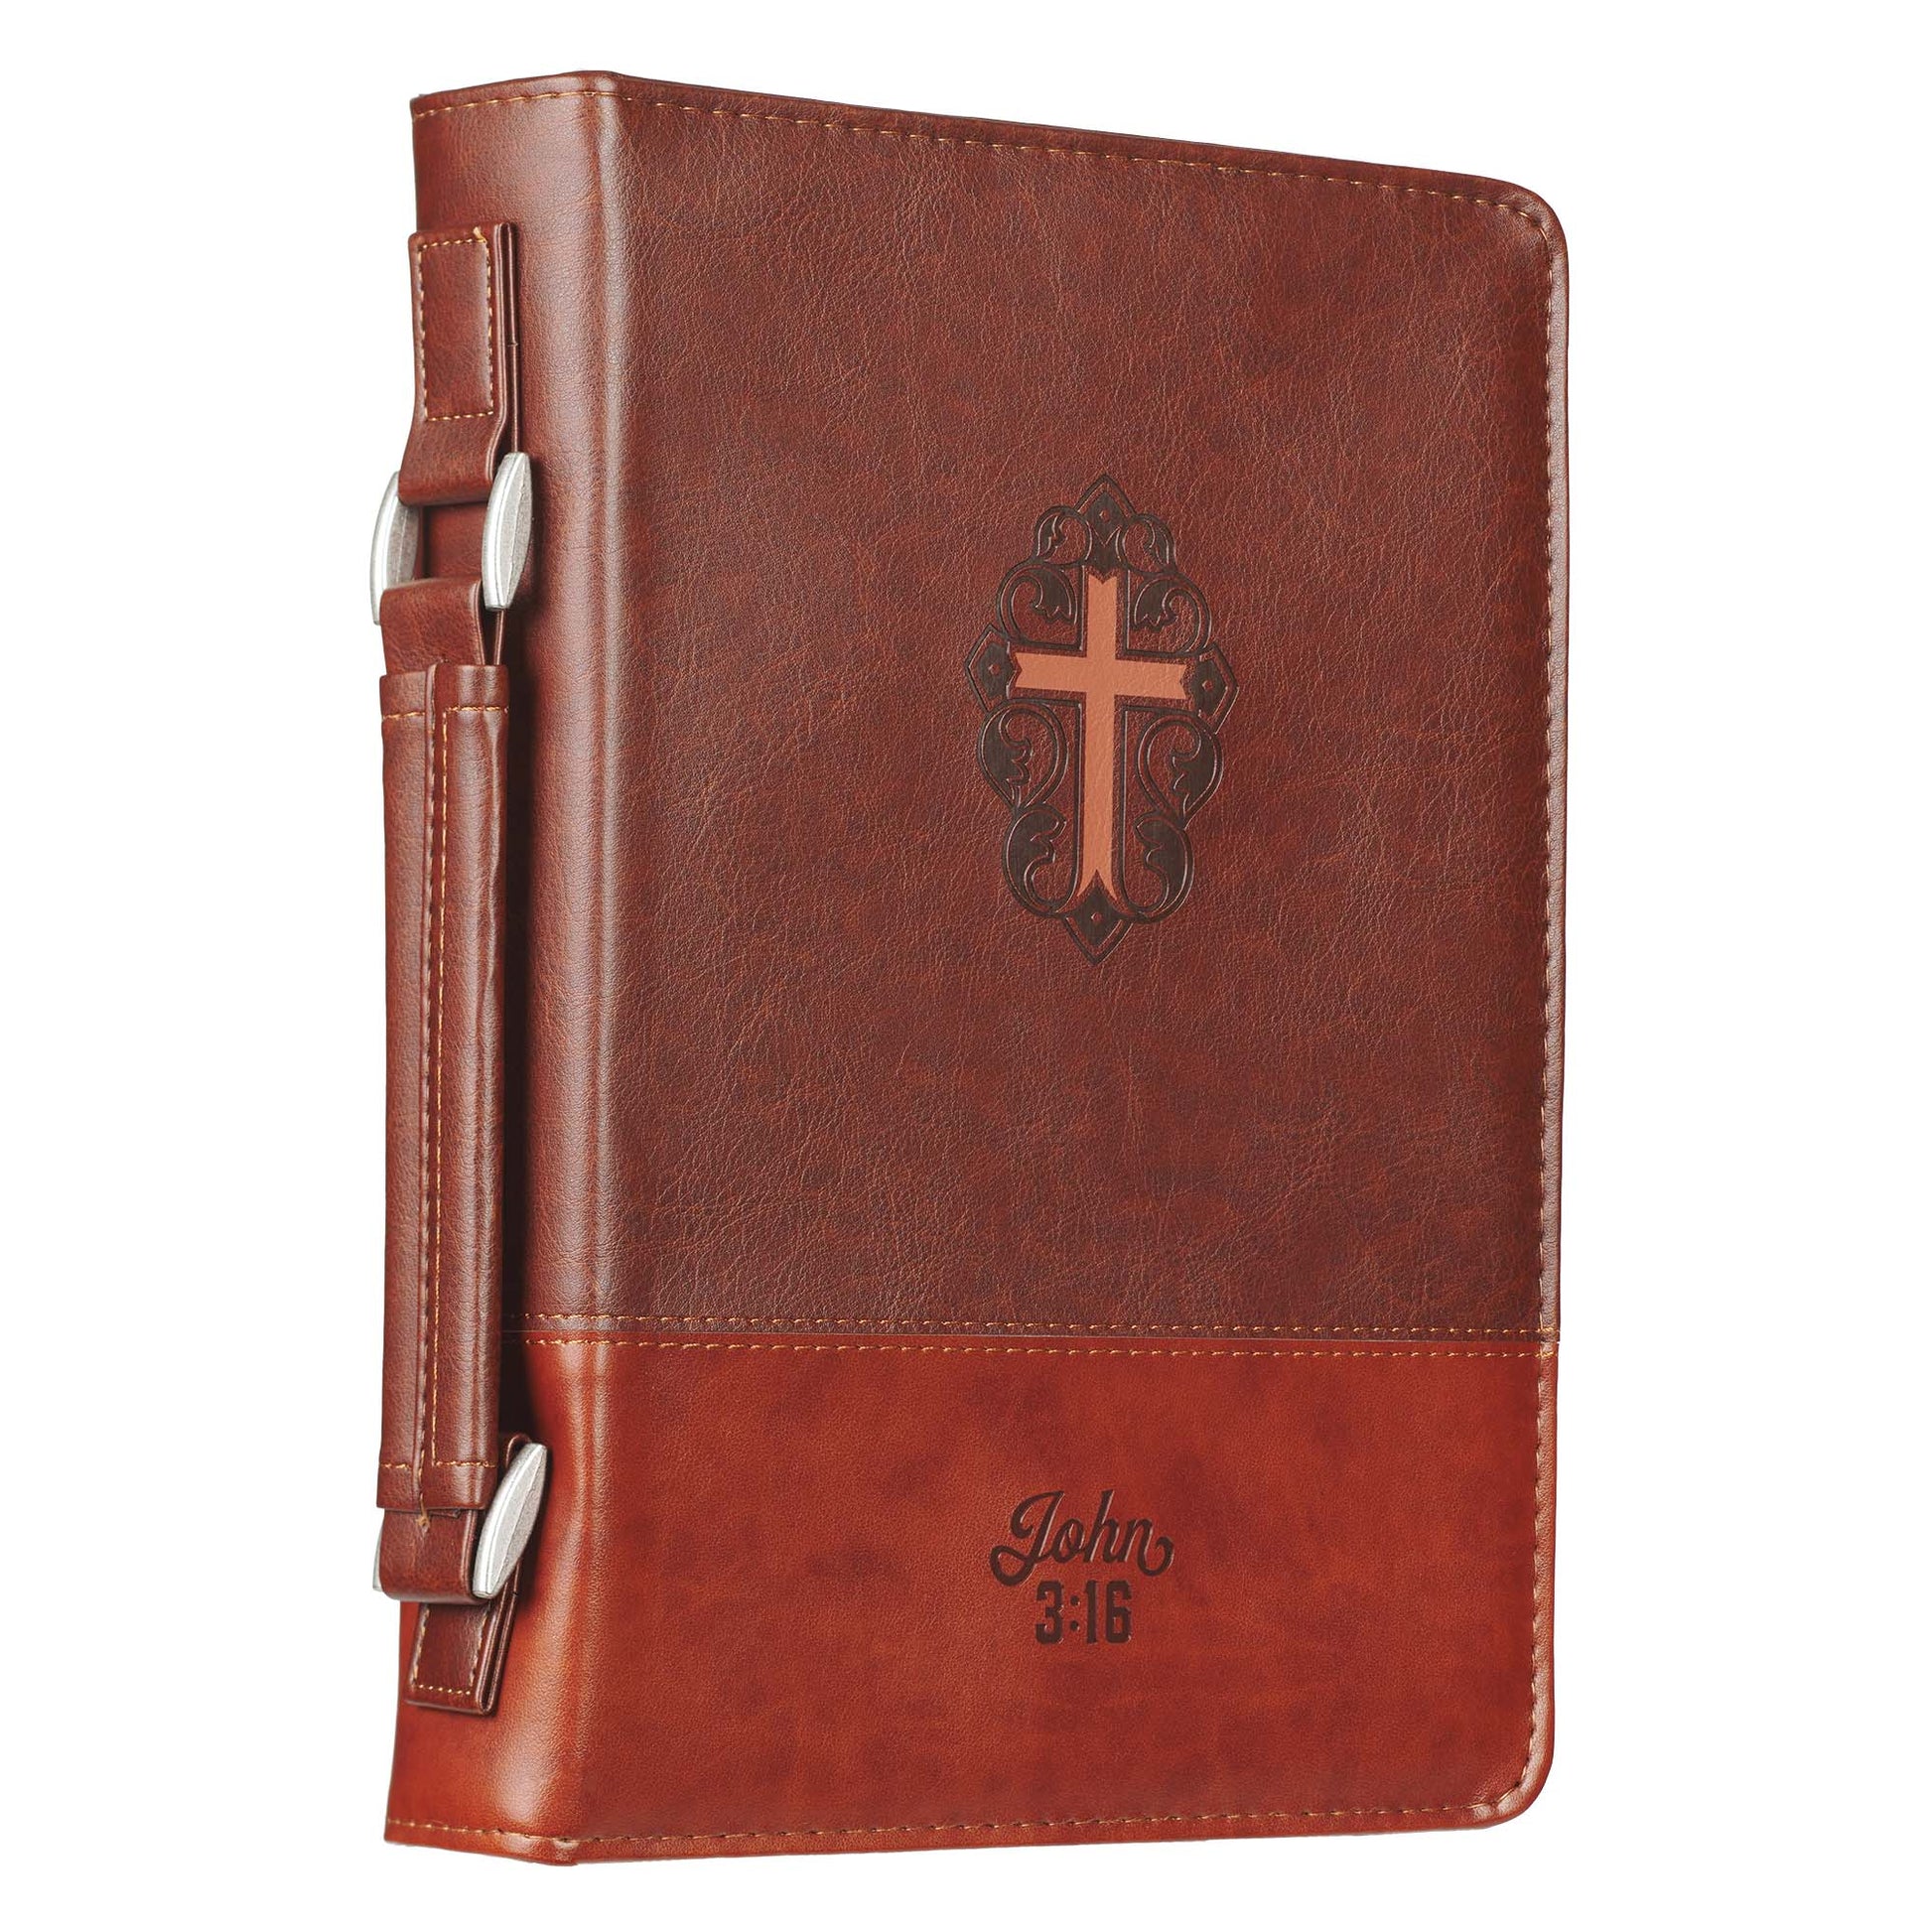 John 3:16 Two-Tone Brown Faux Leather Bible Cover With Cross - The Christian Gift Company